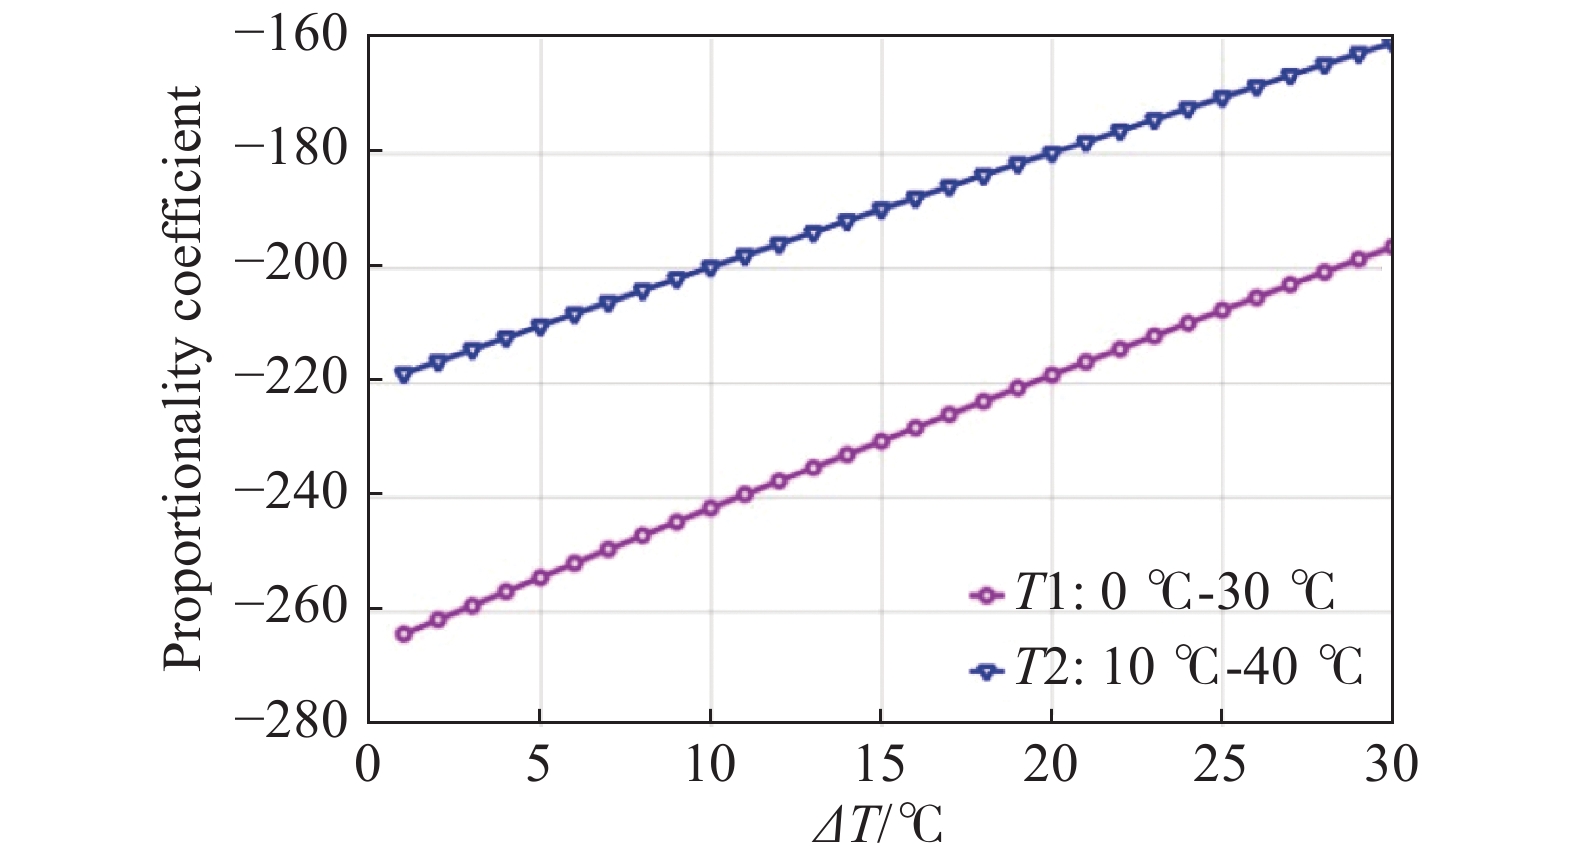 Simulated proportionality coefficient with different temperature ranges via 150 km fiber